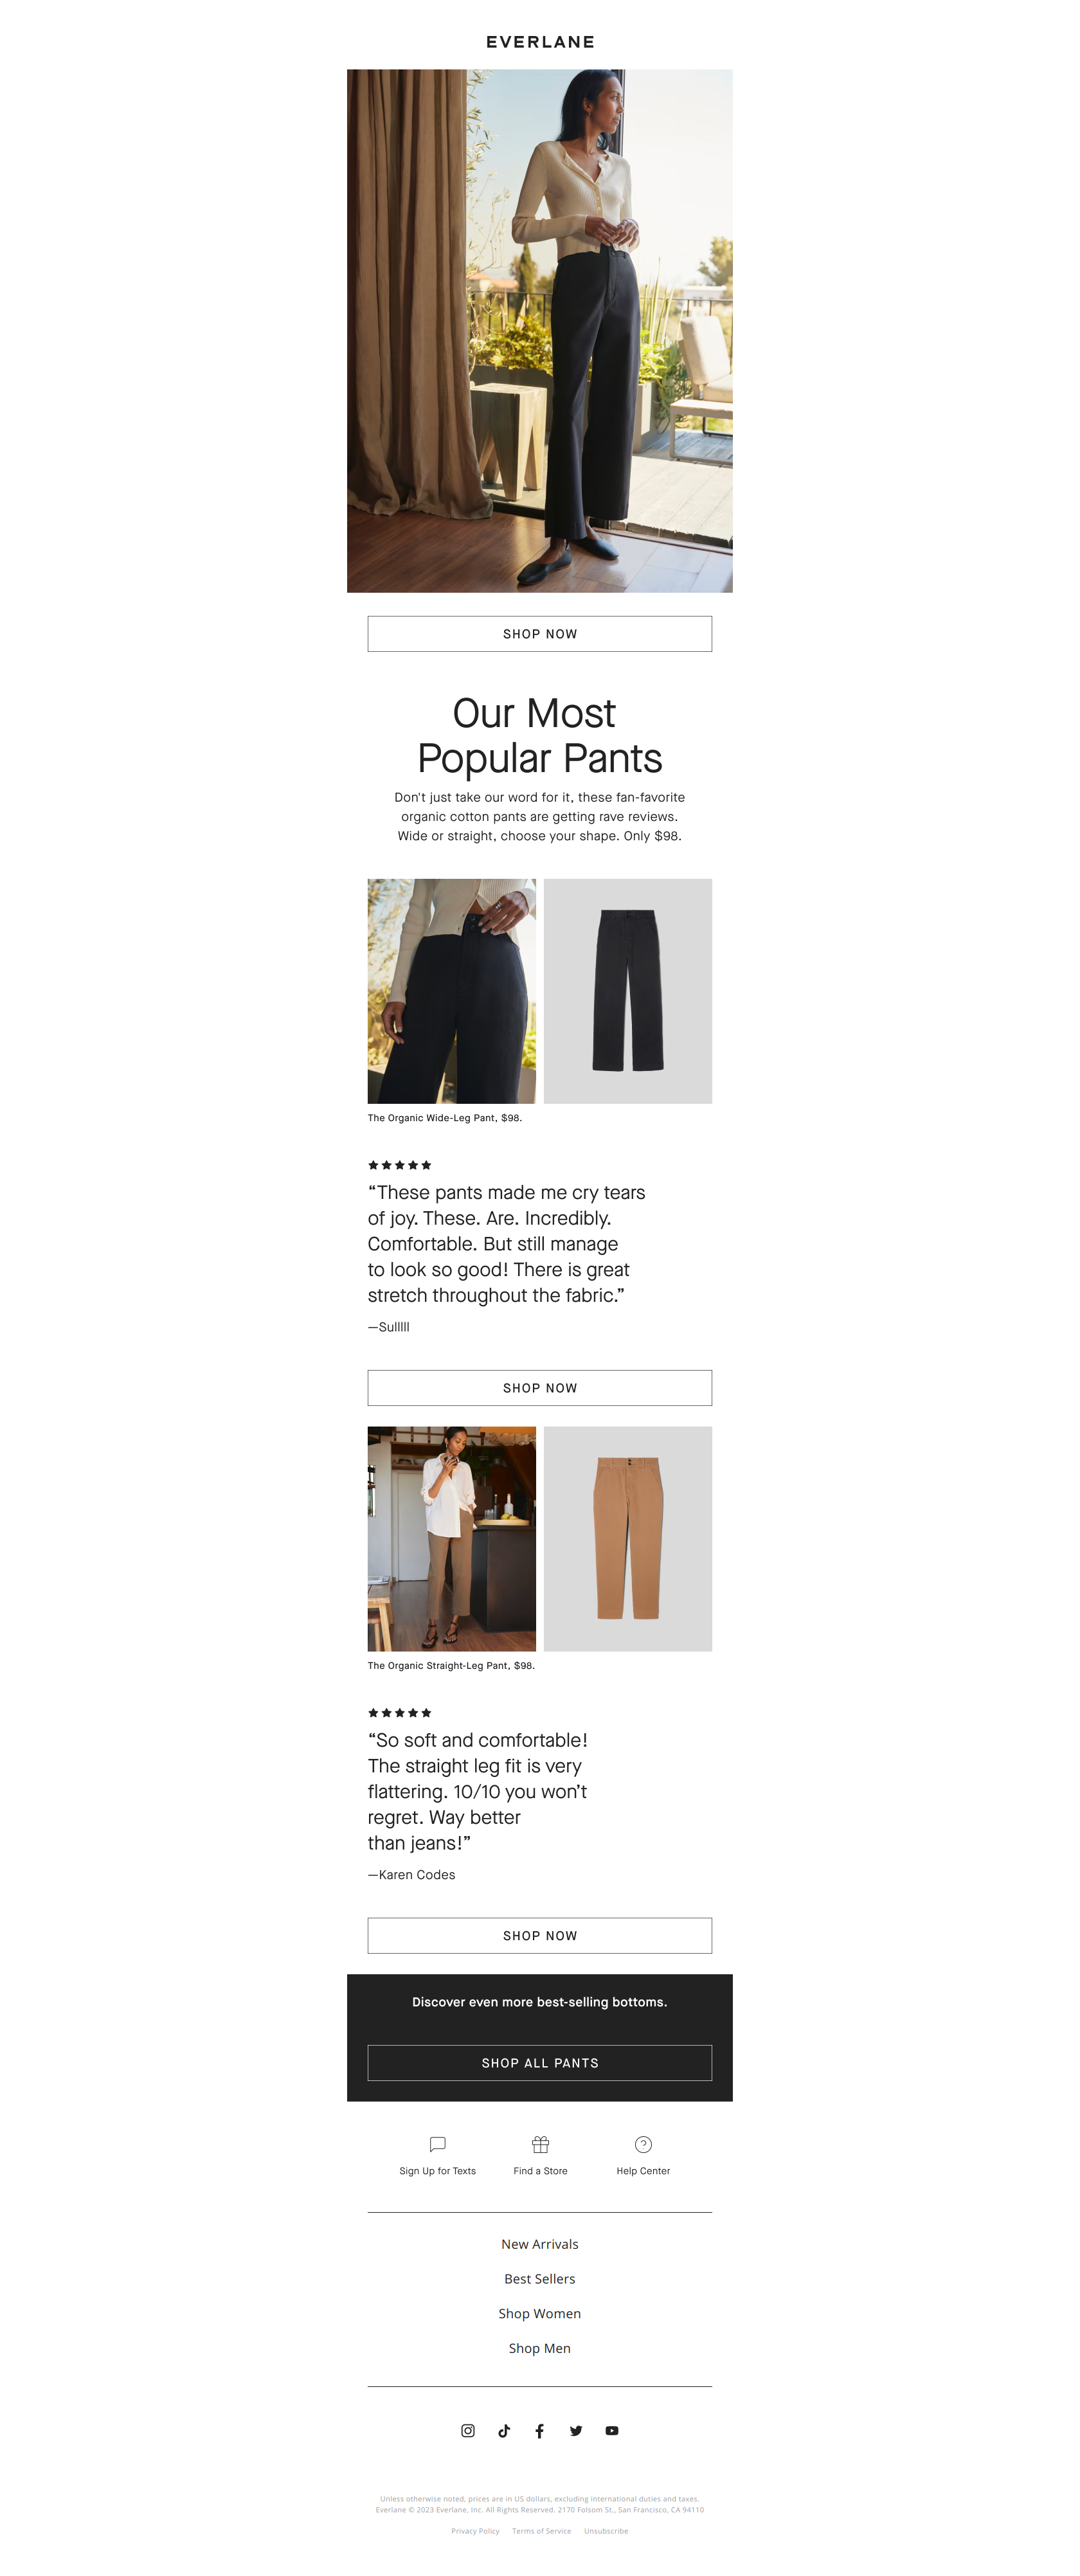 The Pants Everyone Loves - Everlane Newsletter